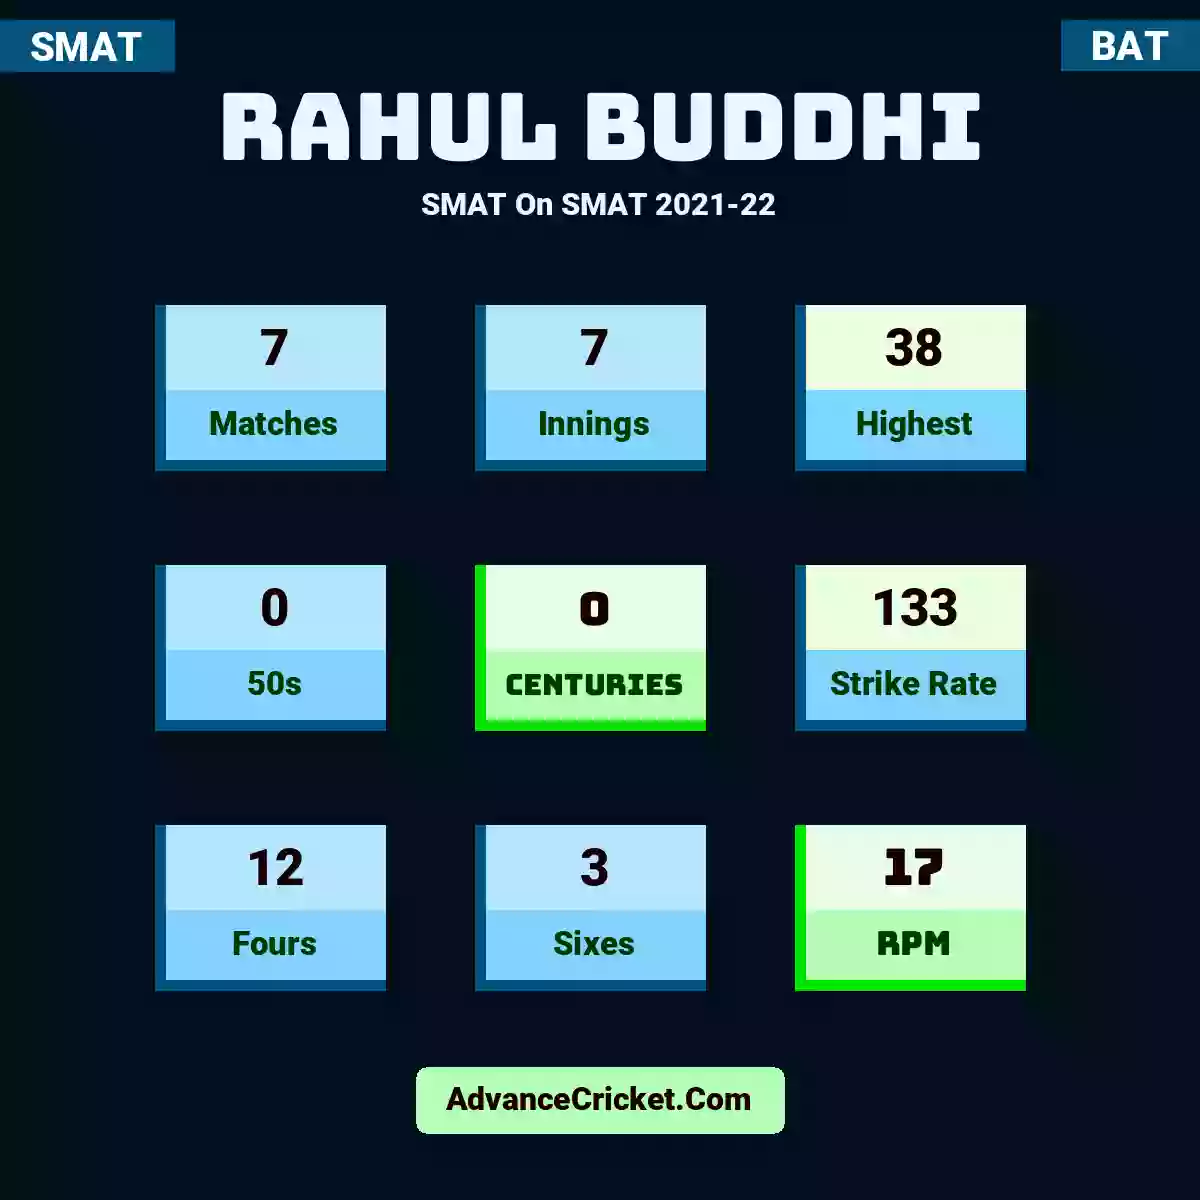 Rahul Buddhi SMAT  On SMAT 2021-22, Rahul Buddhi played 7 matches, scored 38 runs as highest, 0 half-centuries, and 0 centuries, with a strike rate of 133. R.Buddhi hit 12 fours and 3 sixes, with an RPM of 17.